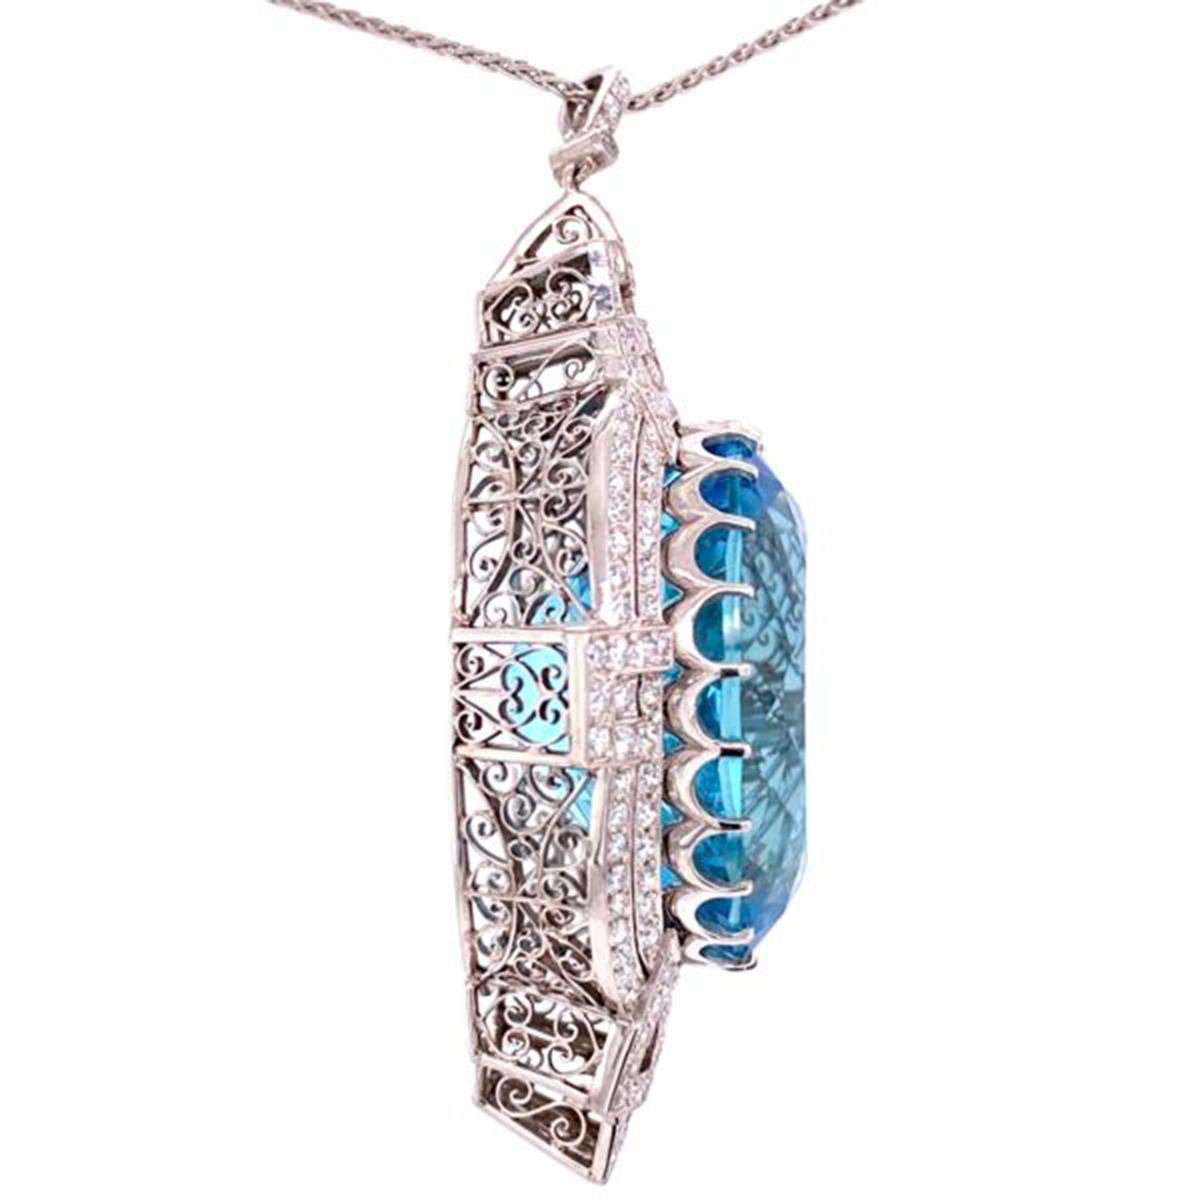 Simply Beautiful! Finely detailed Aquamarine and Diamond Pendant Necklace, center securely set with an Aquamarine, weighing approx. 53.00 Carat total weight surrounded by  Diamonds, weighing approx. 3.50 Carat total weight. Filigree design mounting